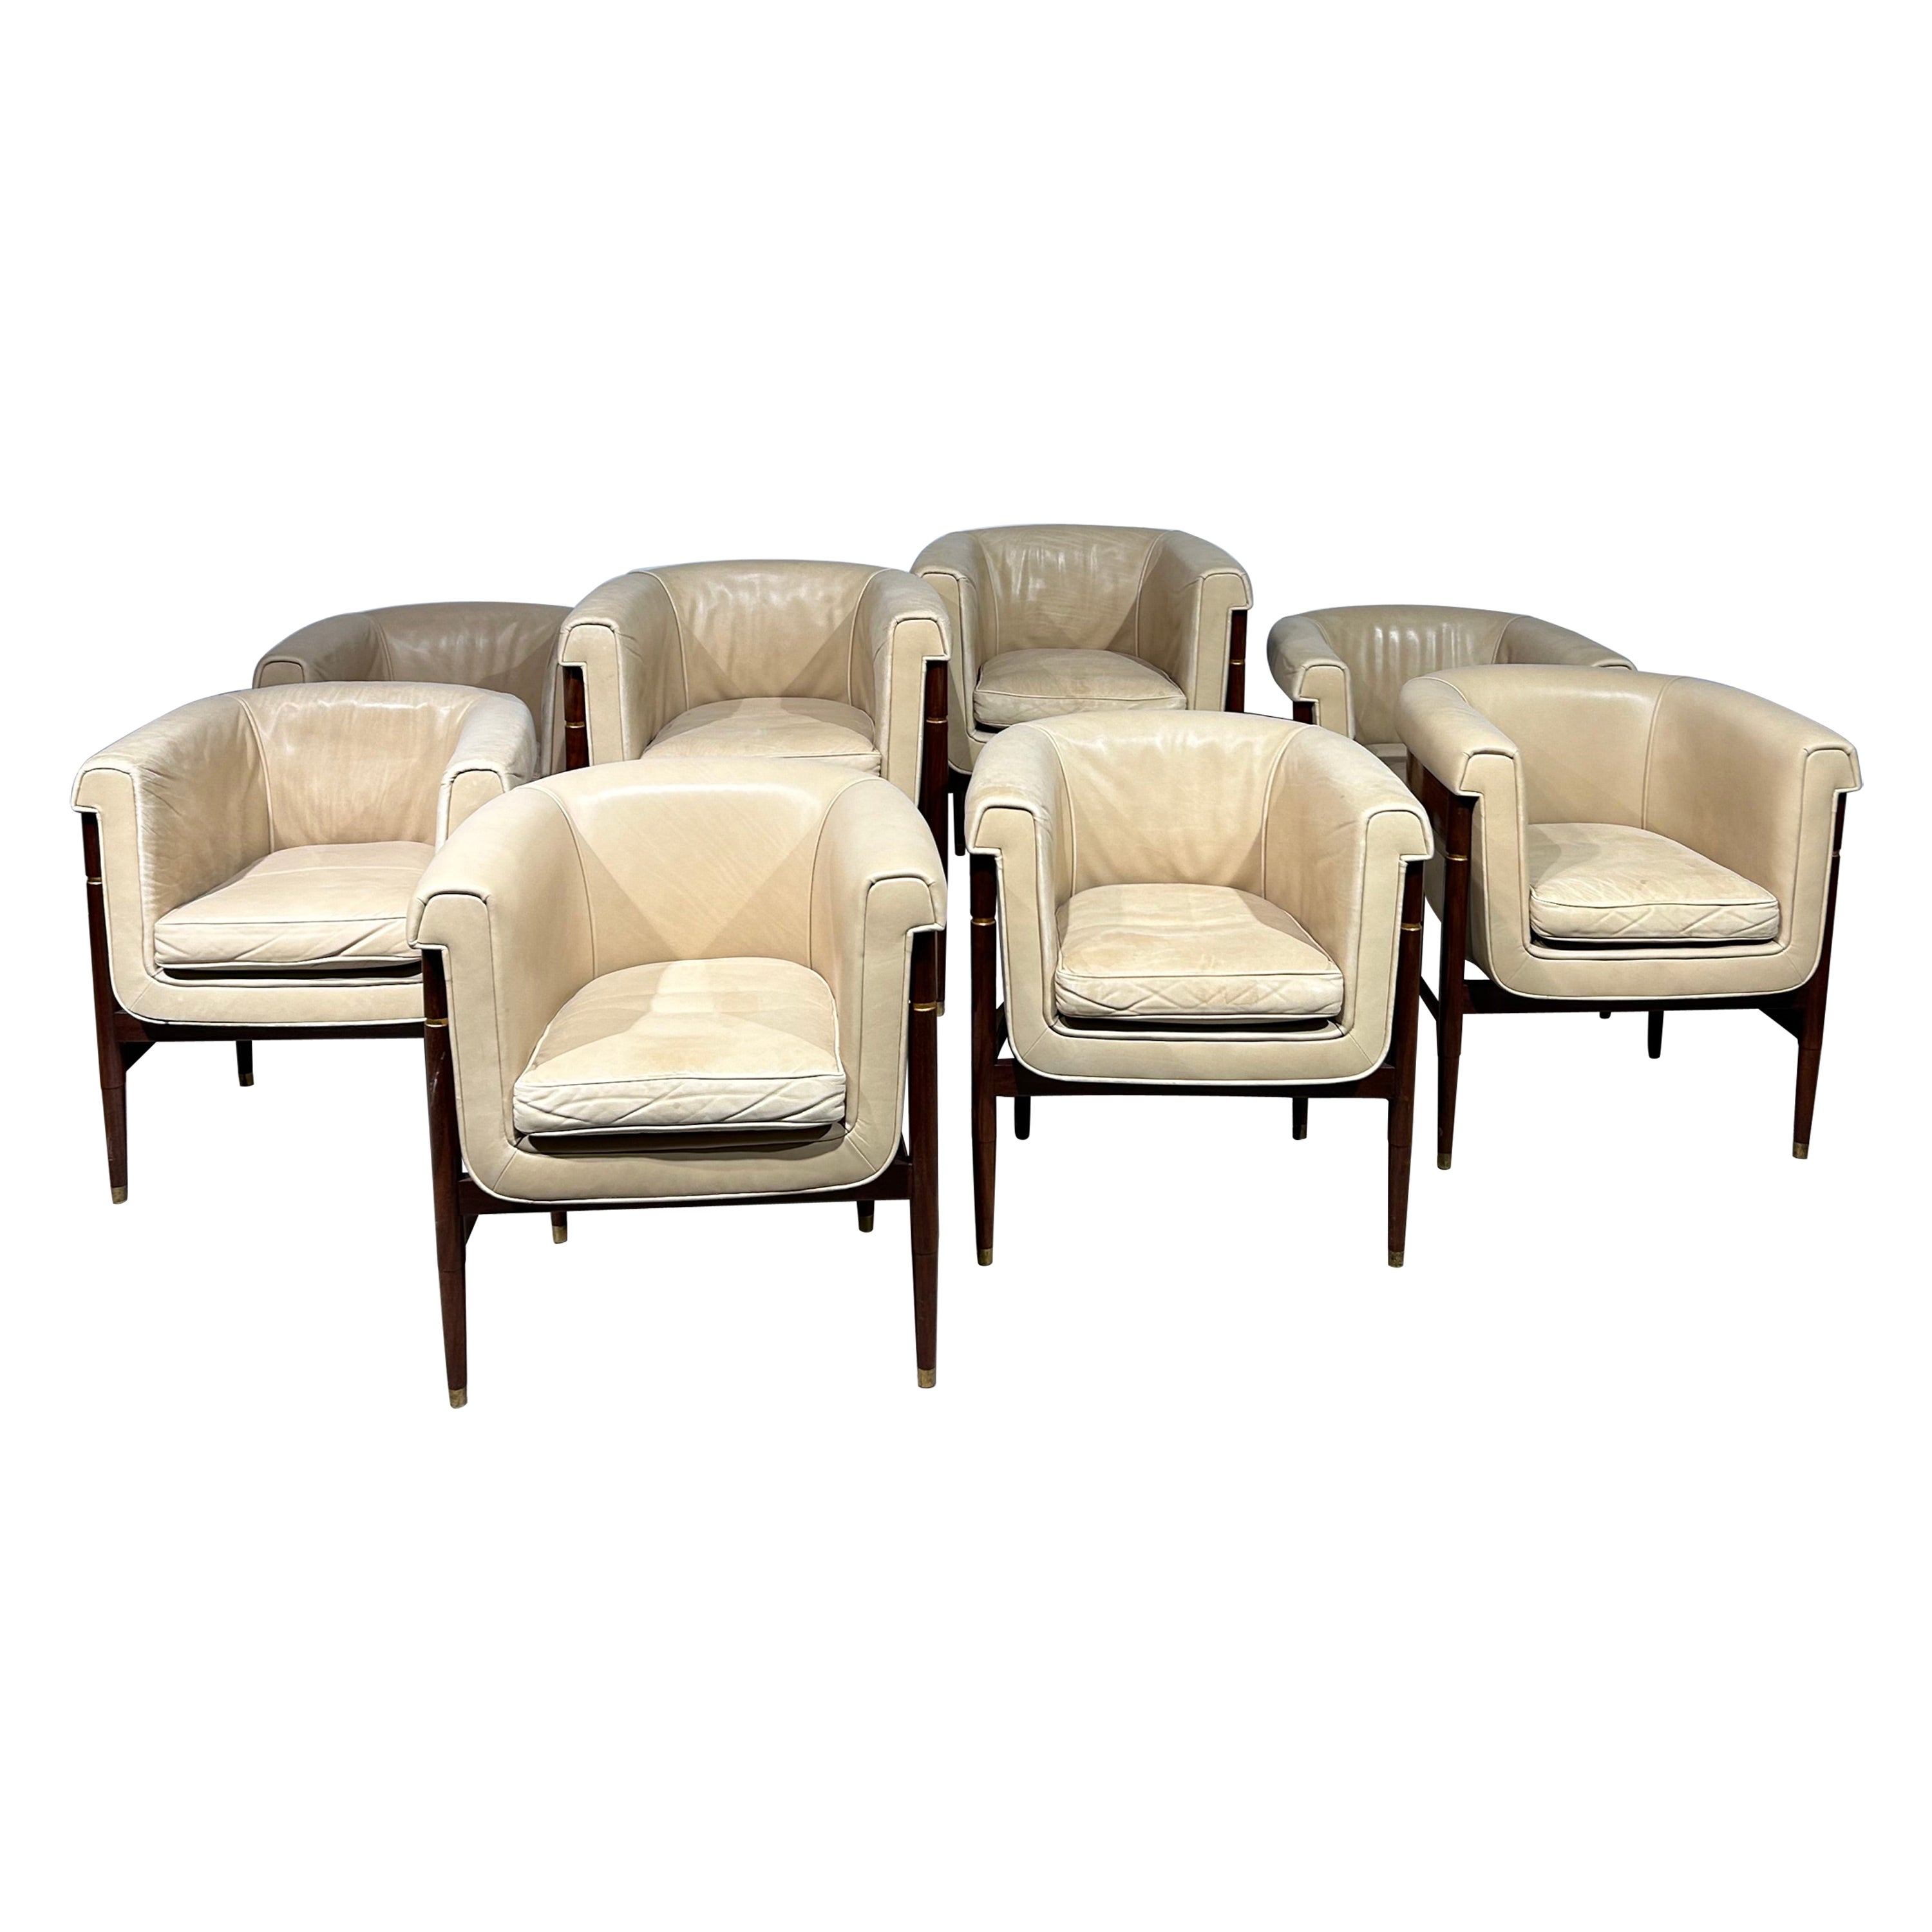 Set of 8 Italian dining cream leather and brown wood easychairs